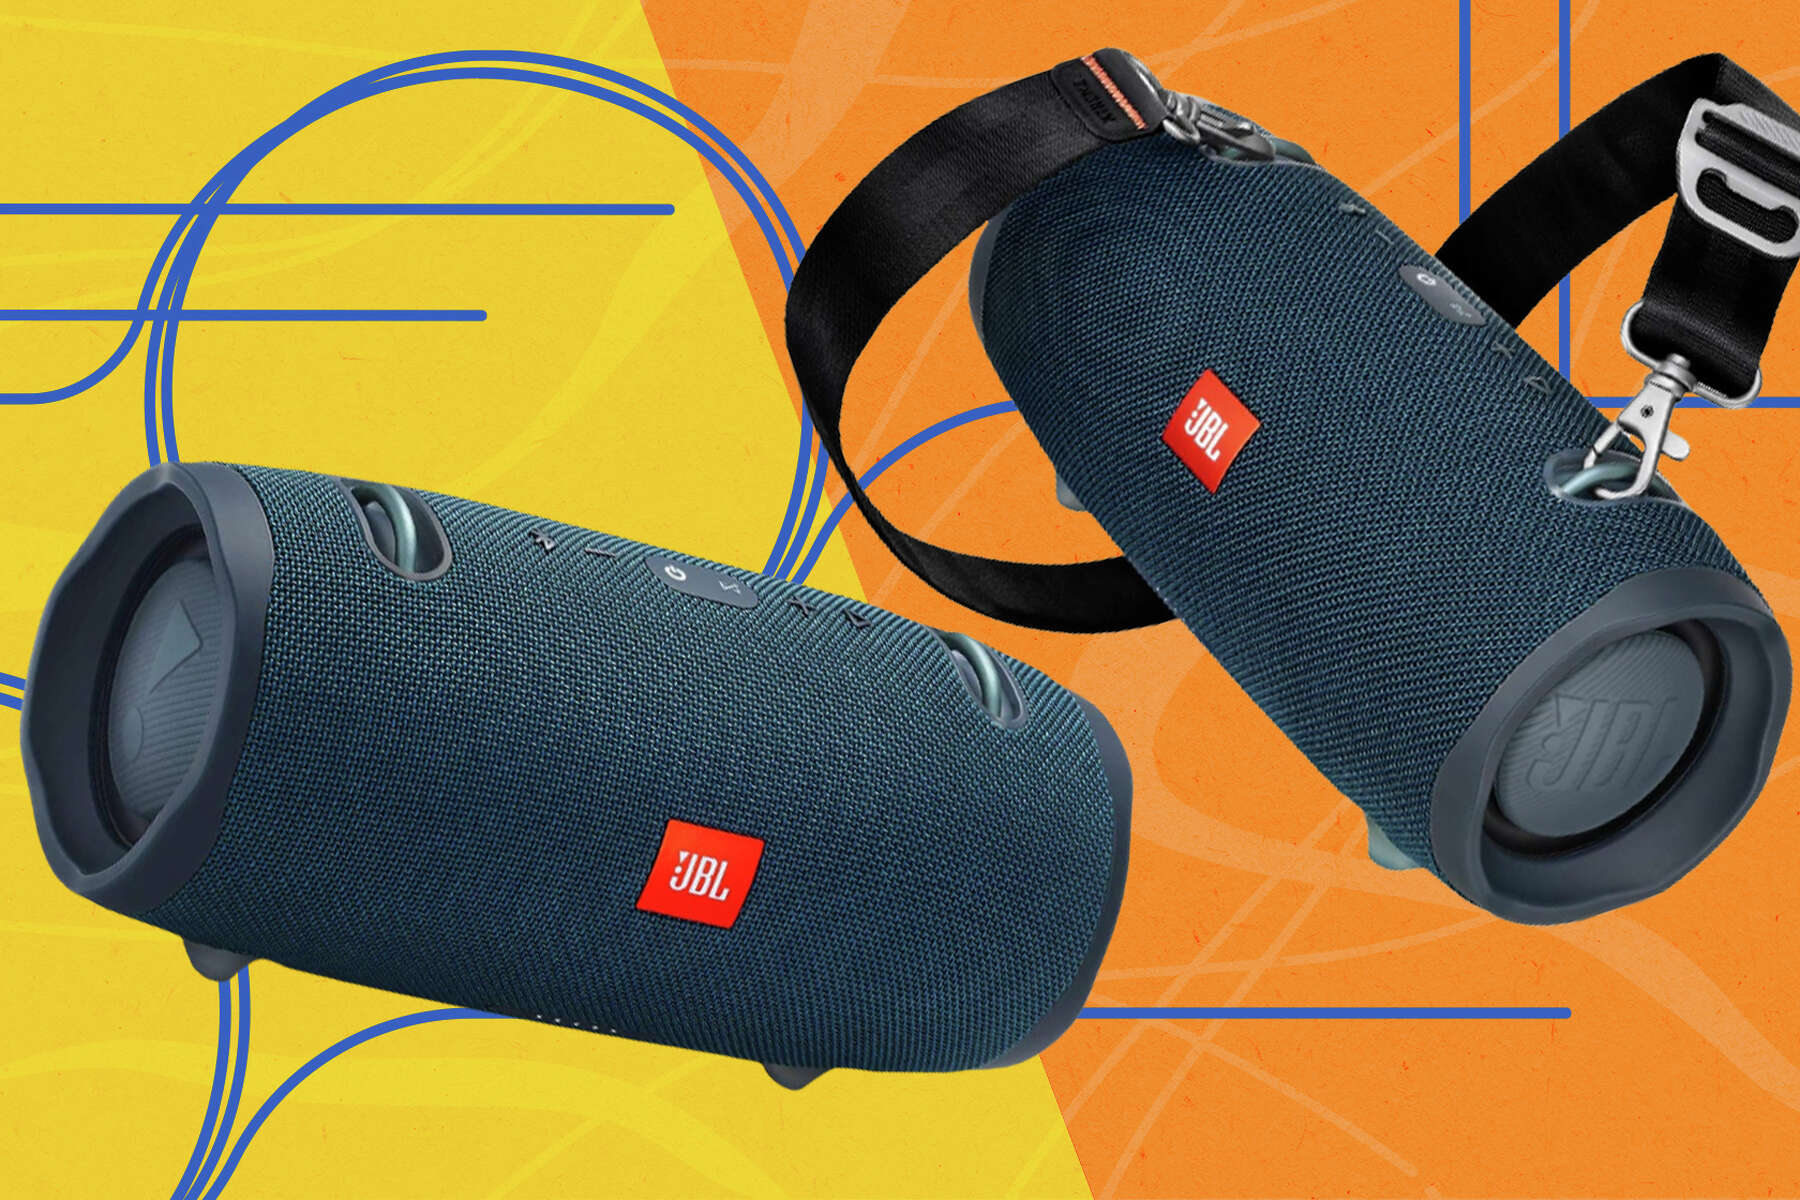 You can now get a Bluetooth speaker that attaches to your Crocs